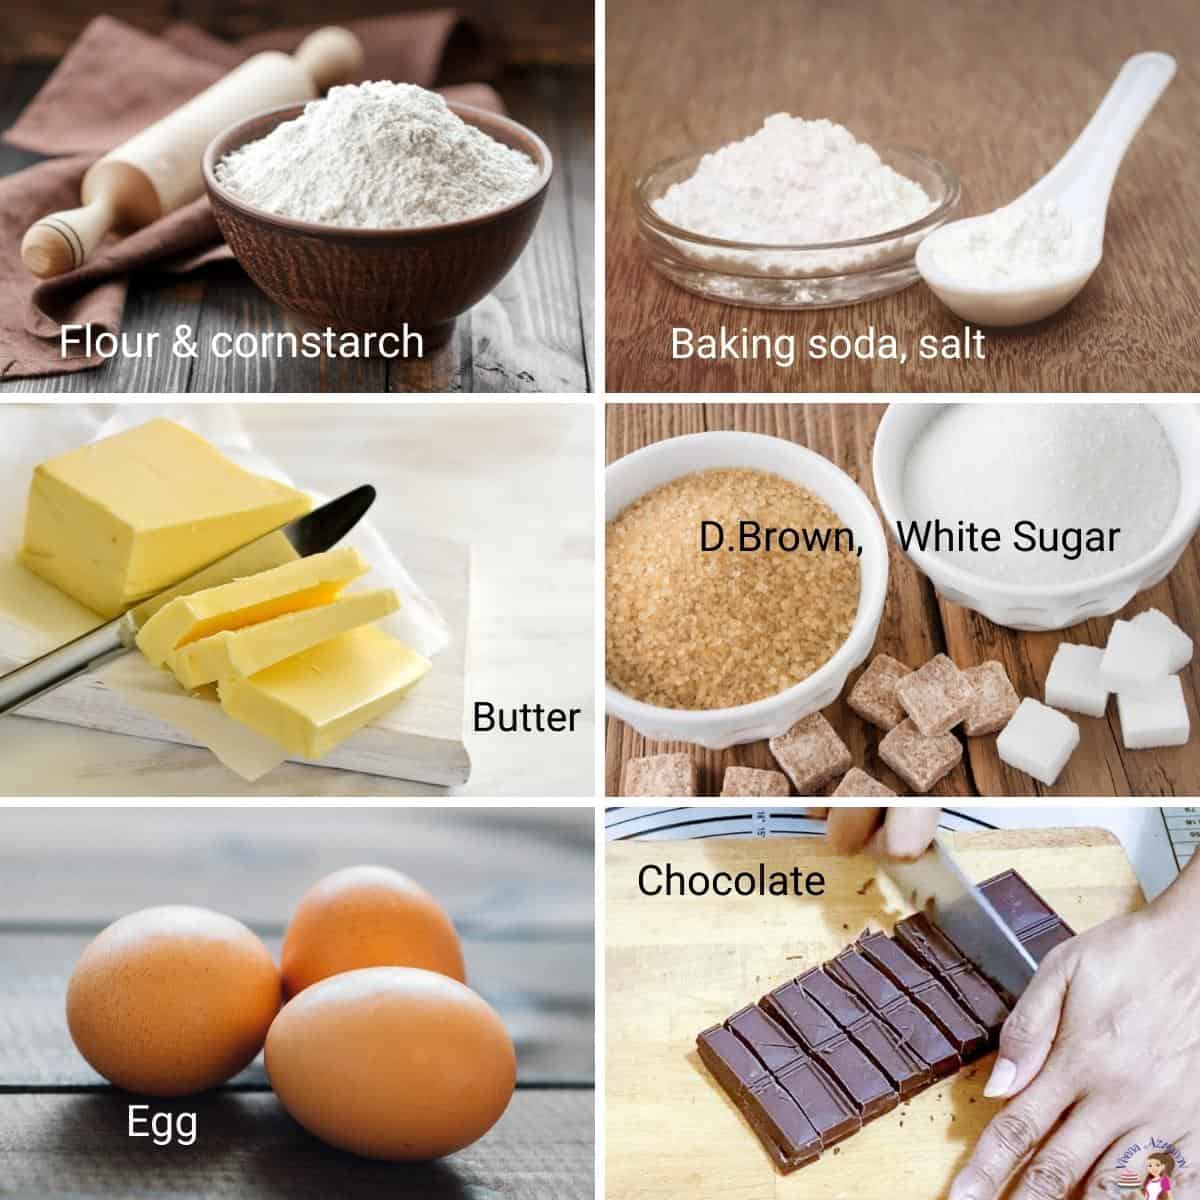 Ingredients for making chocolate chunk cookies.